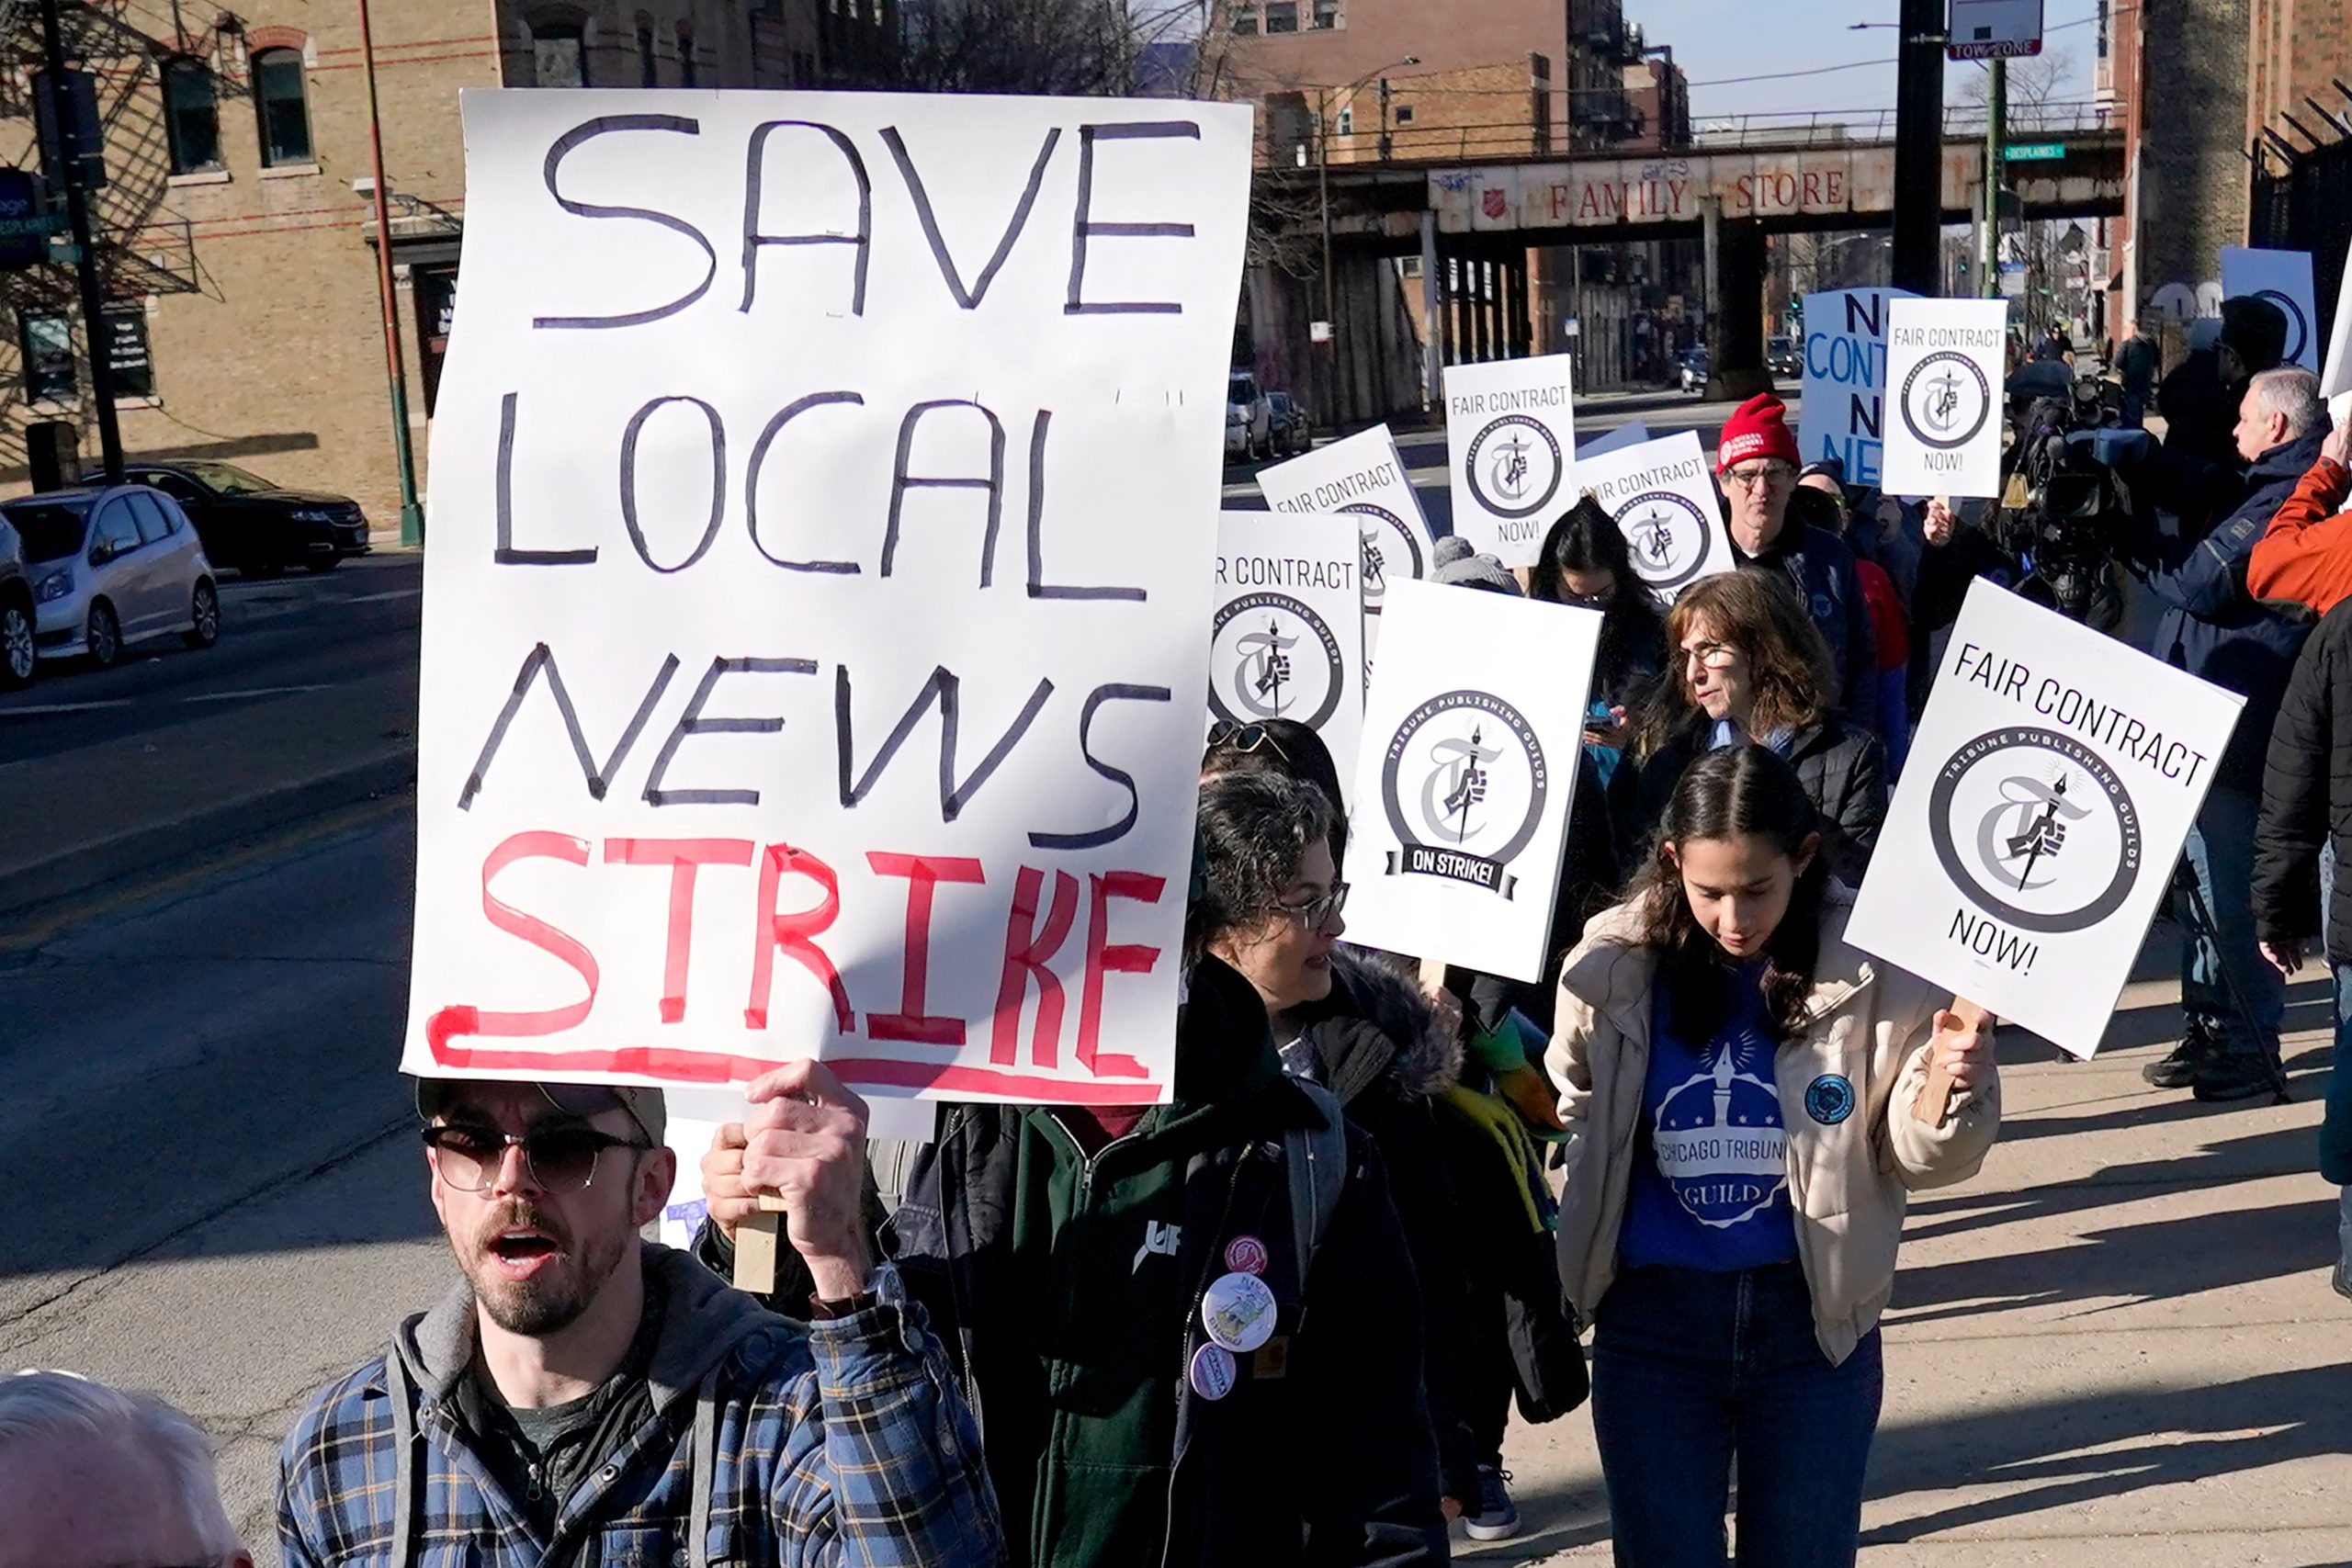 Fetterman Voices Support for Journalists on Strike and Those Laid Off